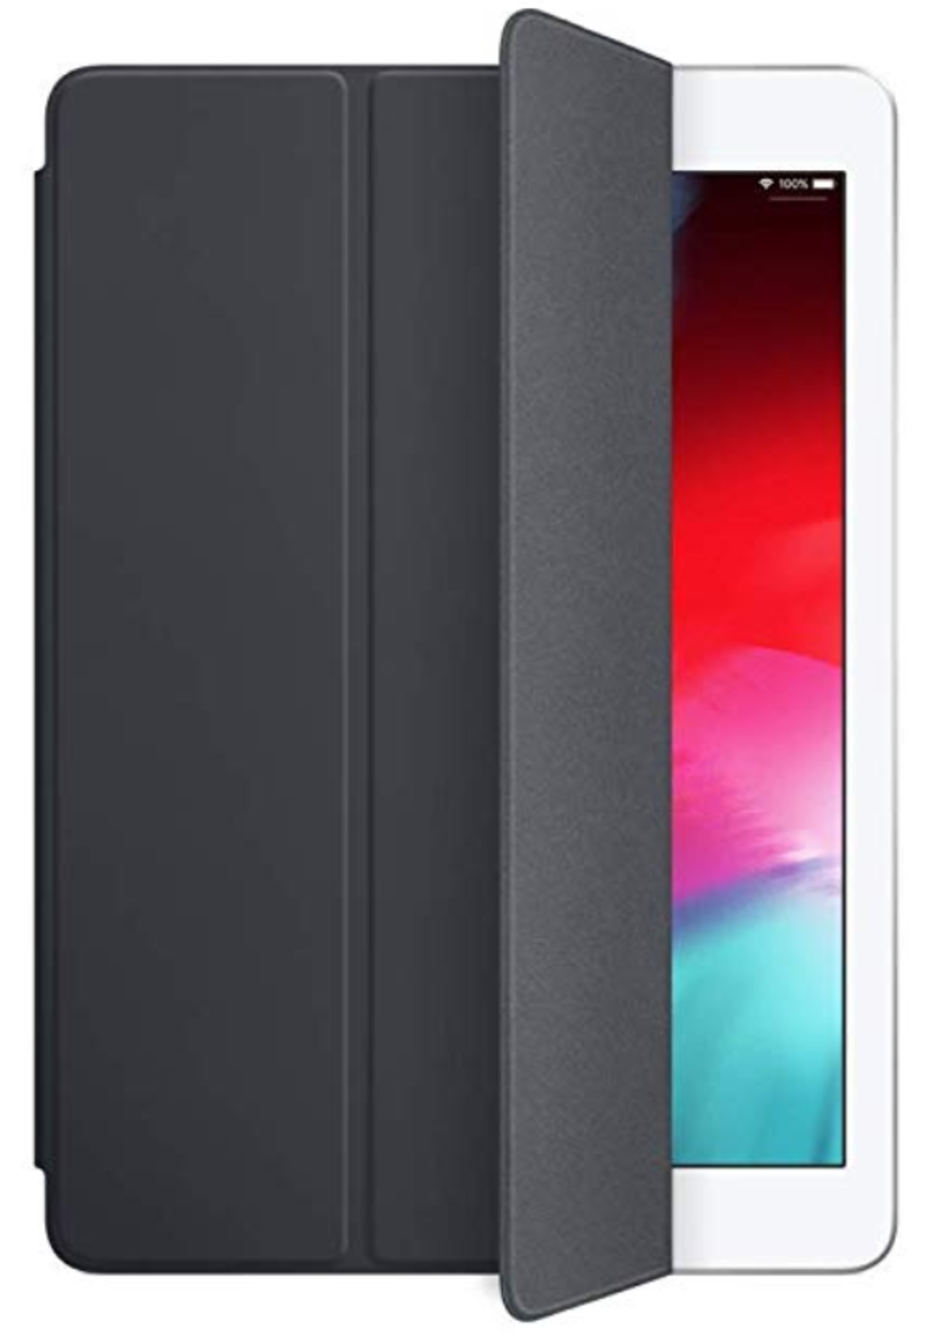 Save 50% off Apple's price for this official iPad Smart Case - Pick up this popular official Apple iPad accessory for half-price at Amazon